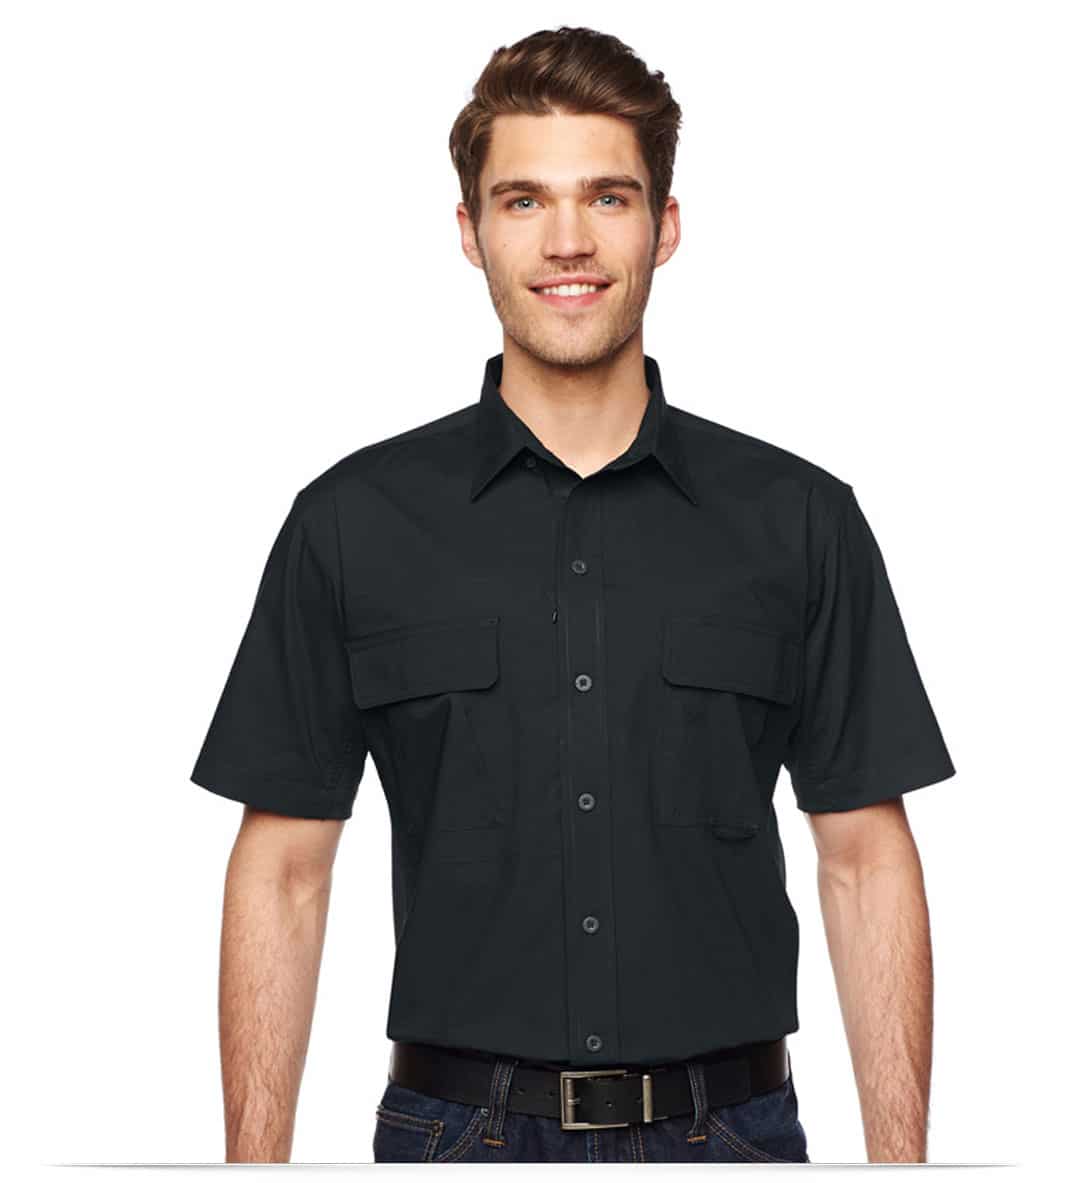 Customized Dickies Work Shirts for Men & Women Embroidered